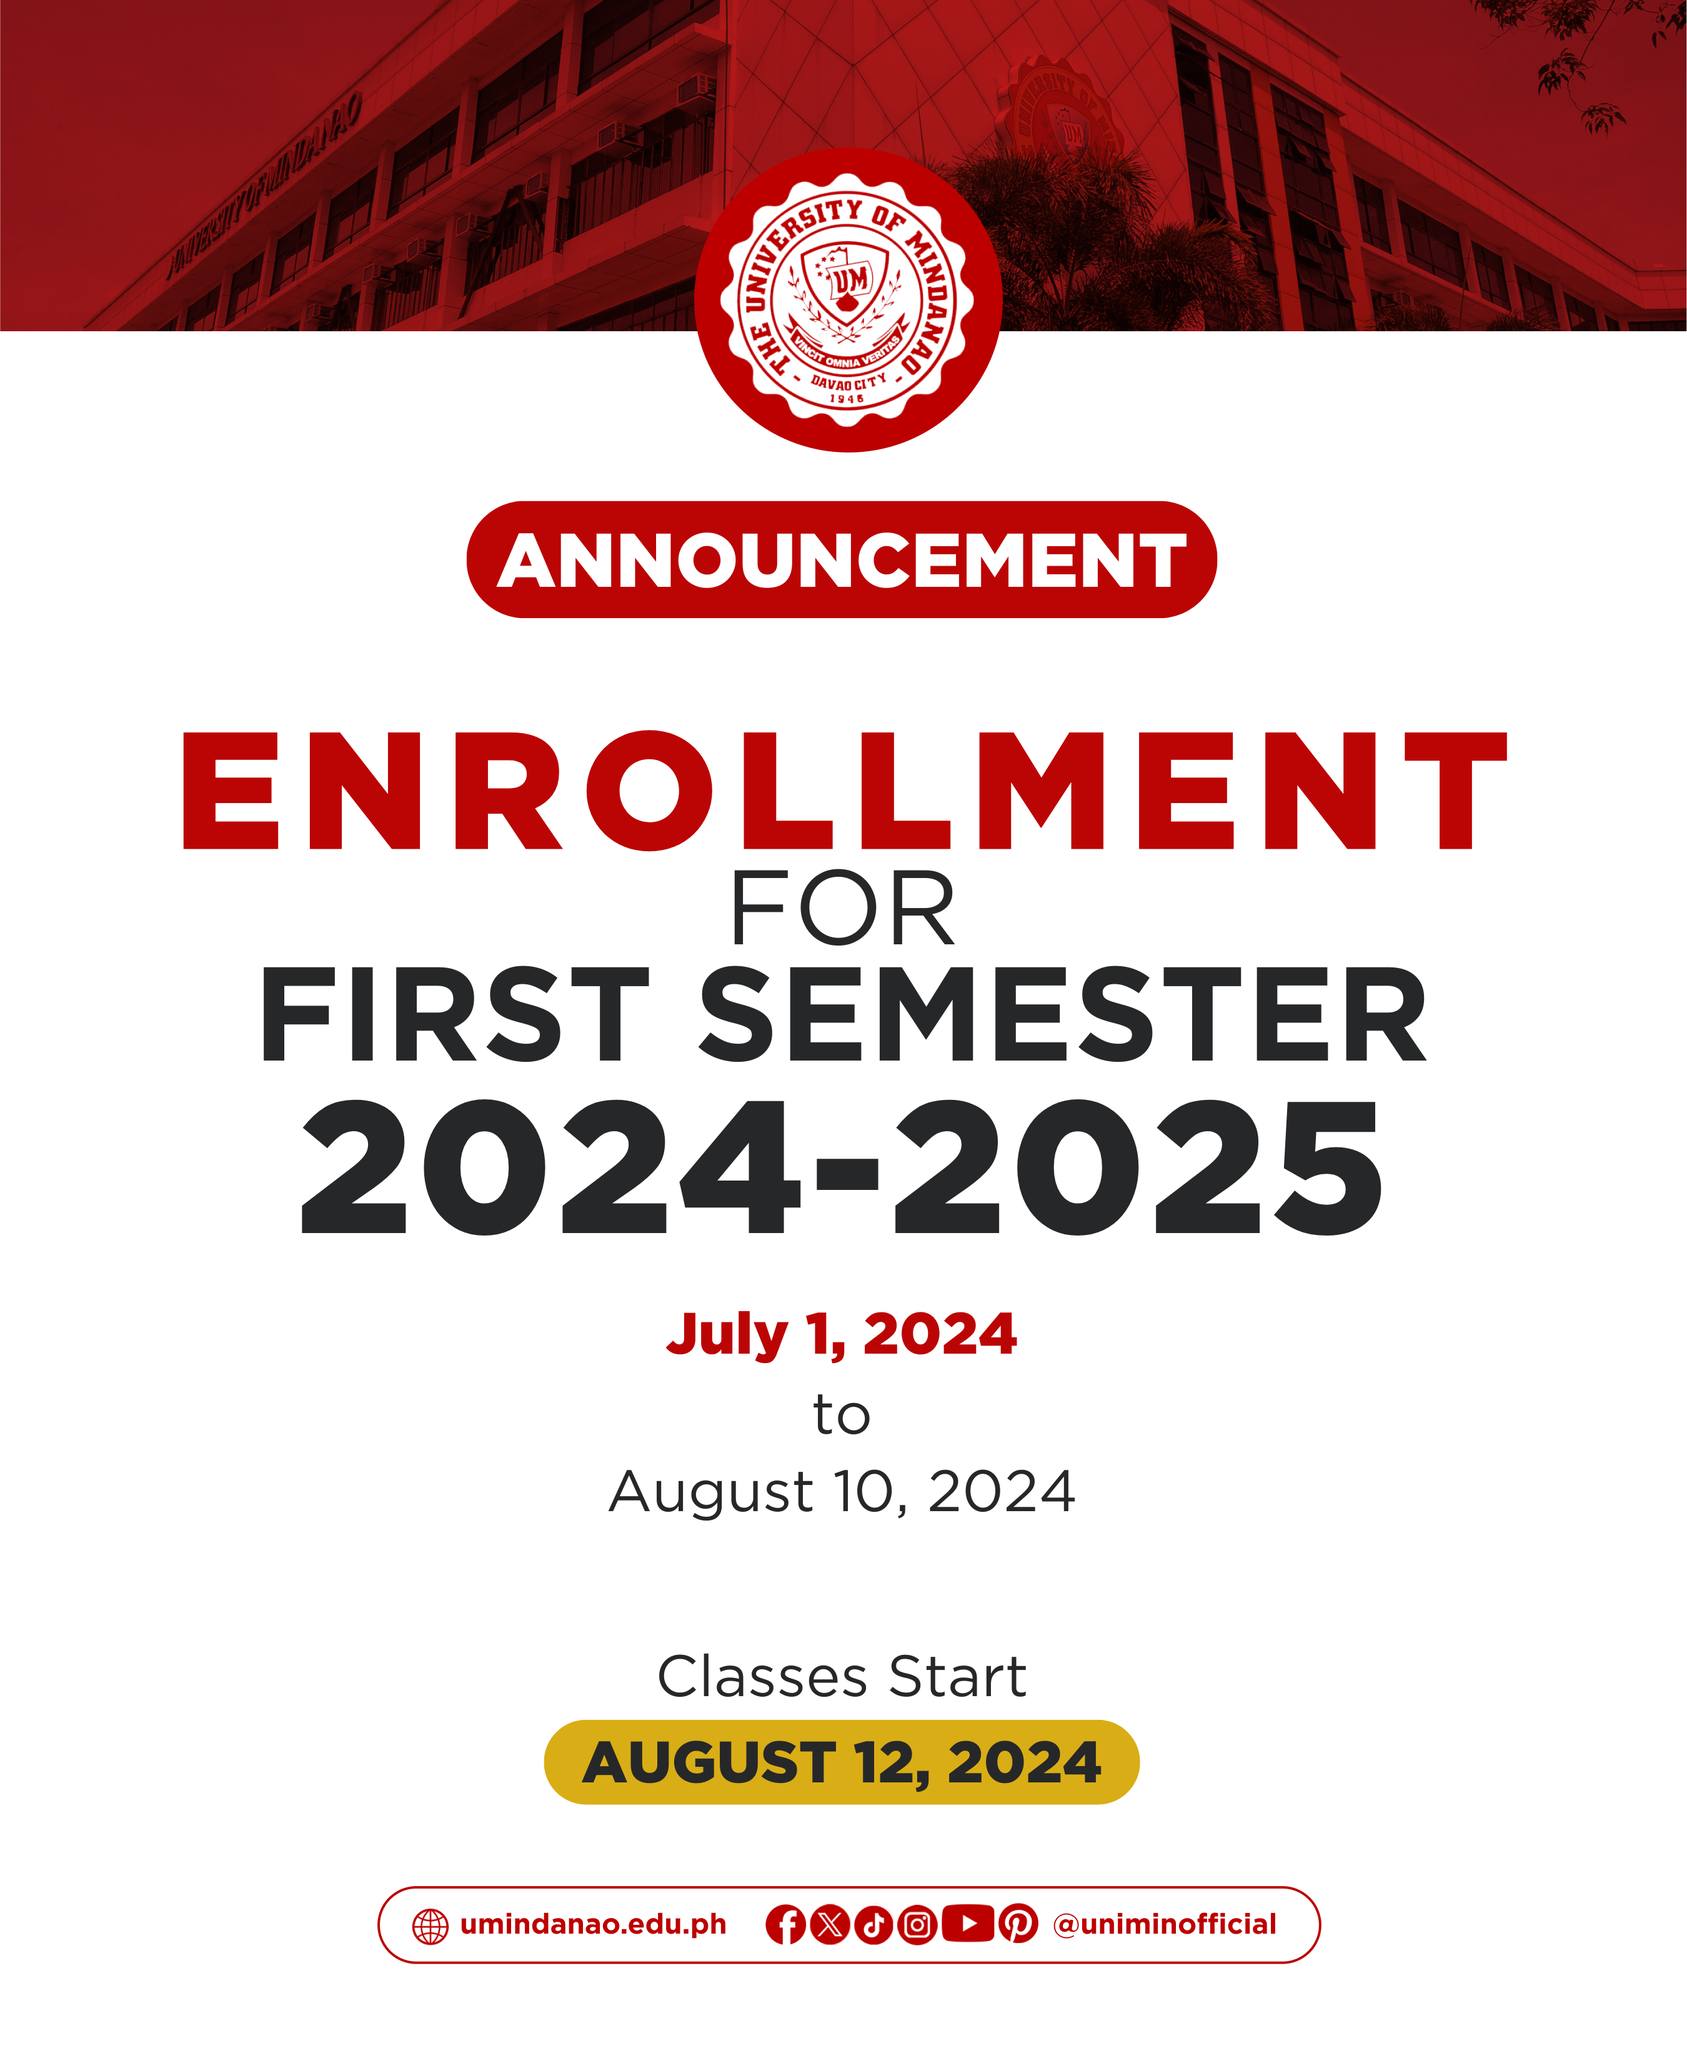 ANNOUNCEMENT: First Semester SY 2024 - 2025 enrollment dates and start of classes